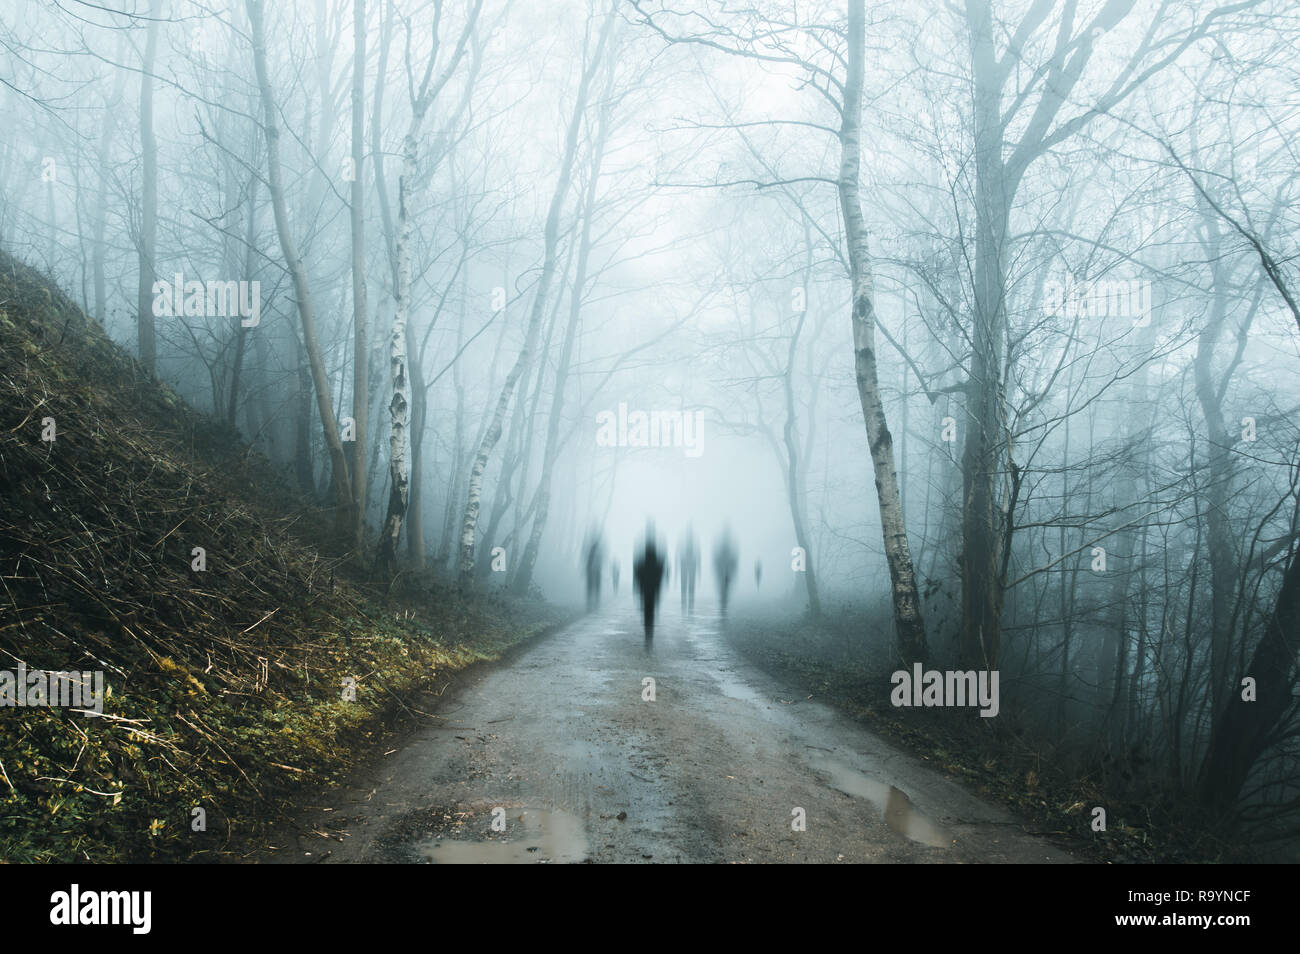 A group of eerie ghostly figures emerging from the fog on a spooky forest  road in winter. With a high contrast photoshop edit. Stock Photo